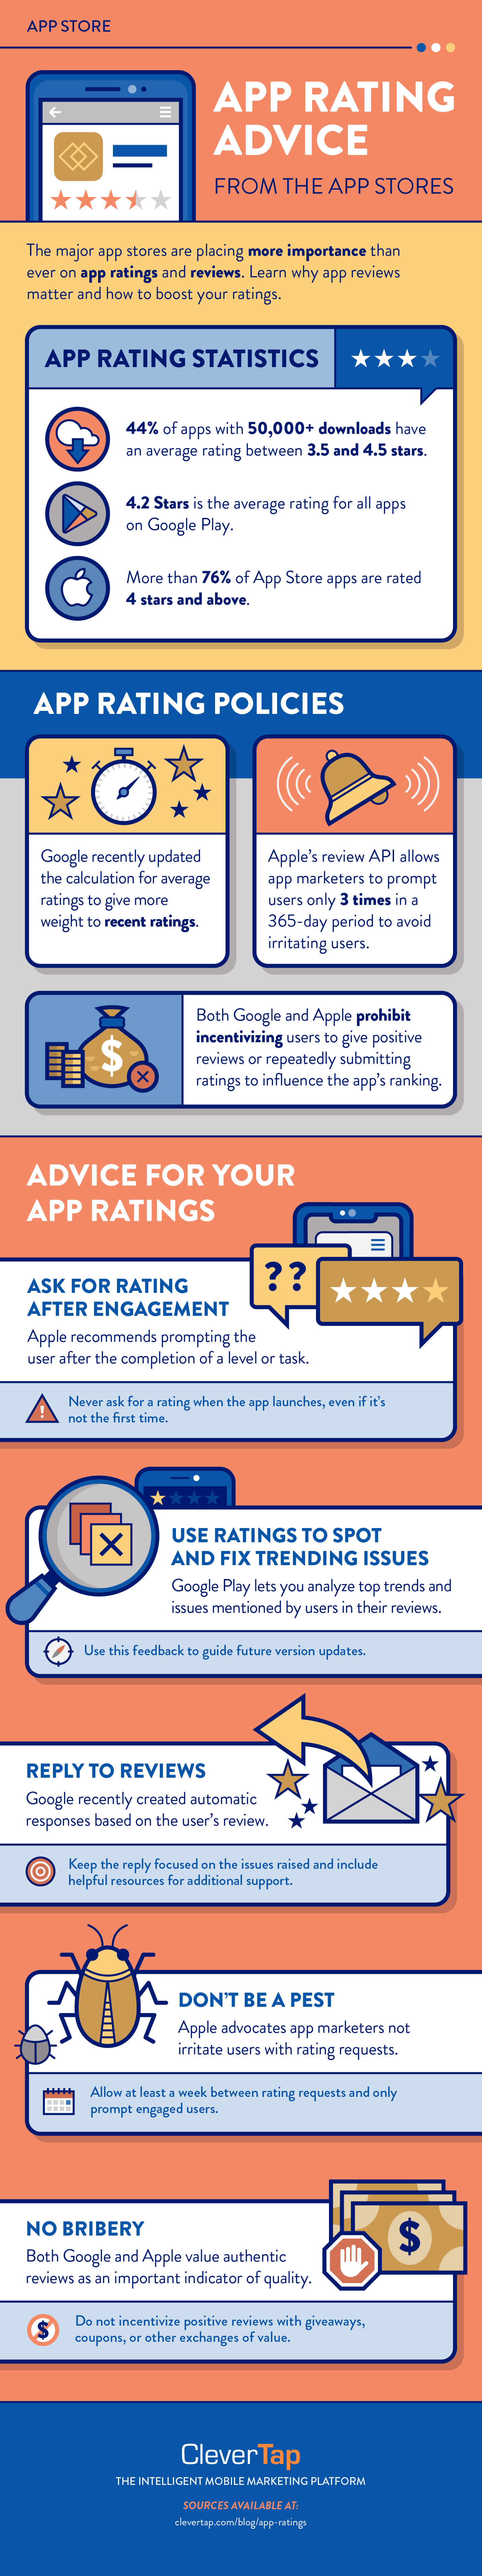 App Ratings advice from major app stores 